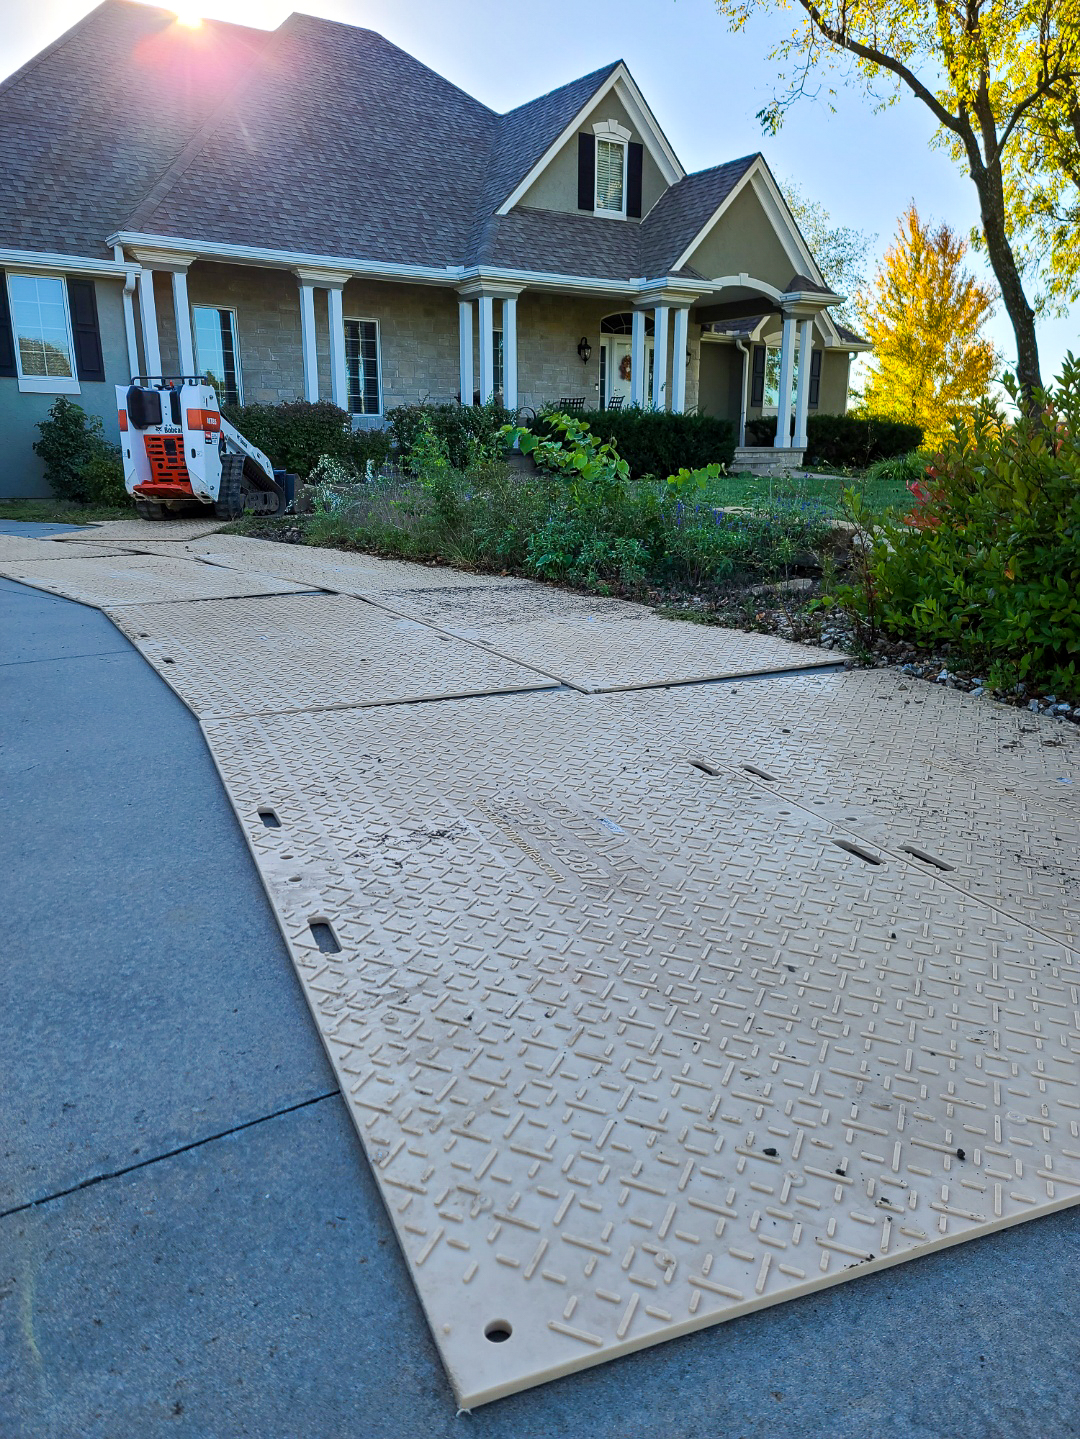 Scout Mats™ being used on a driveway